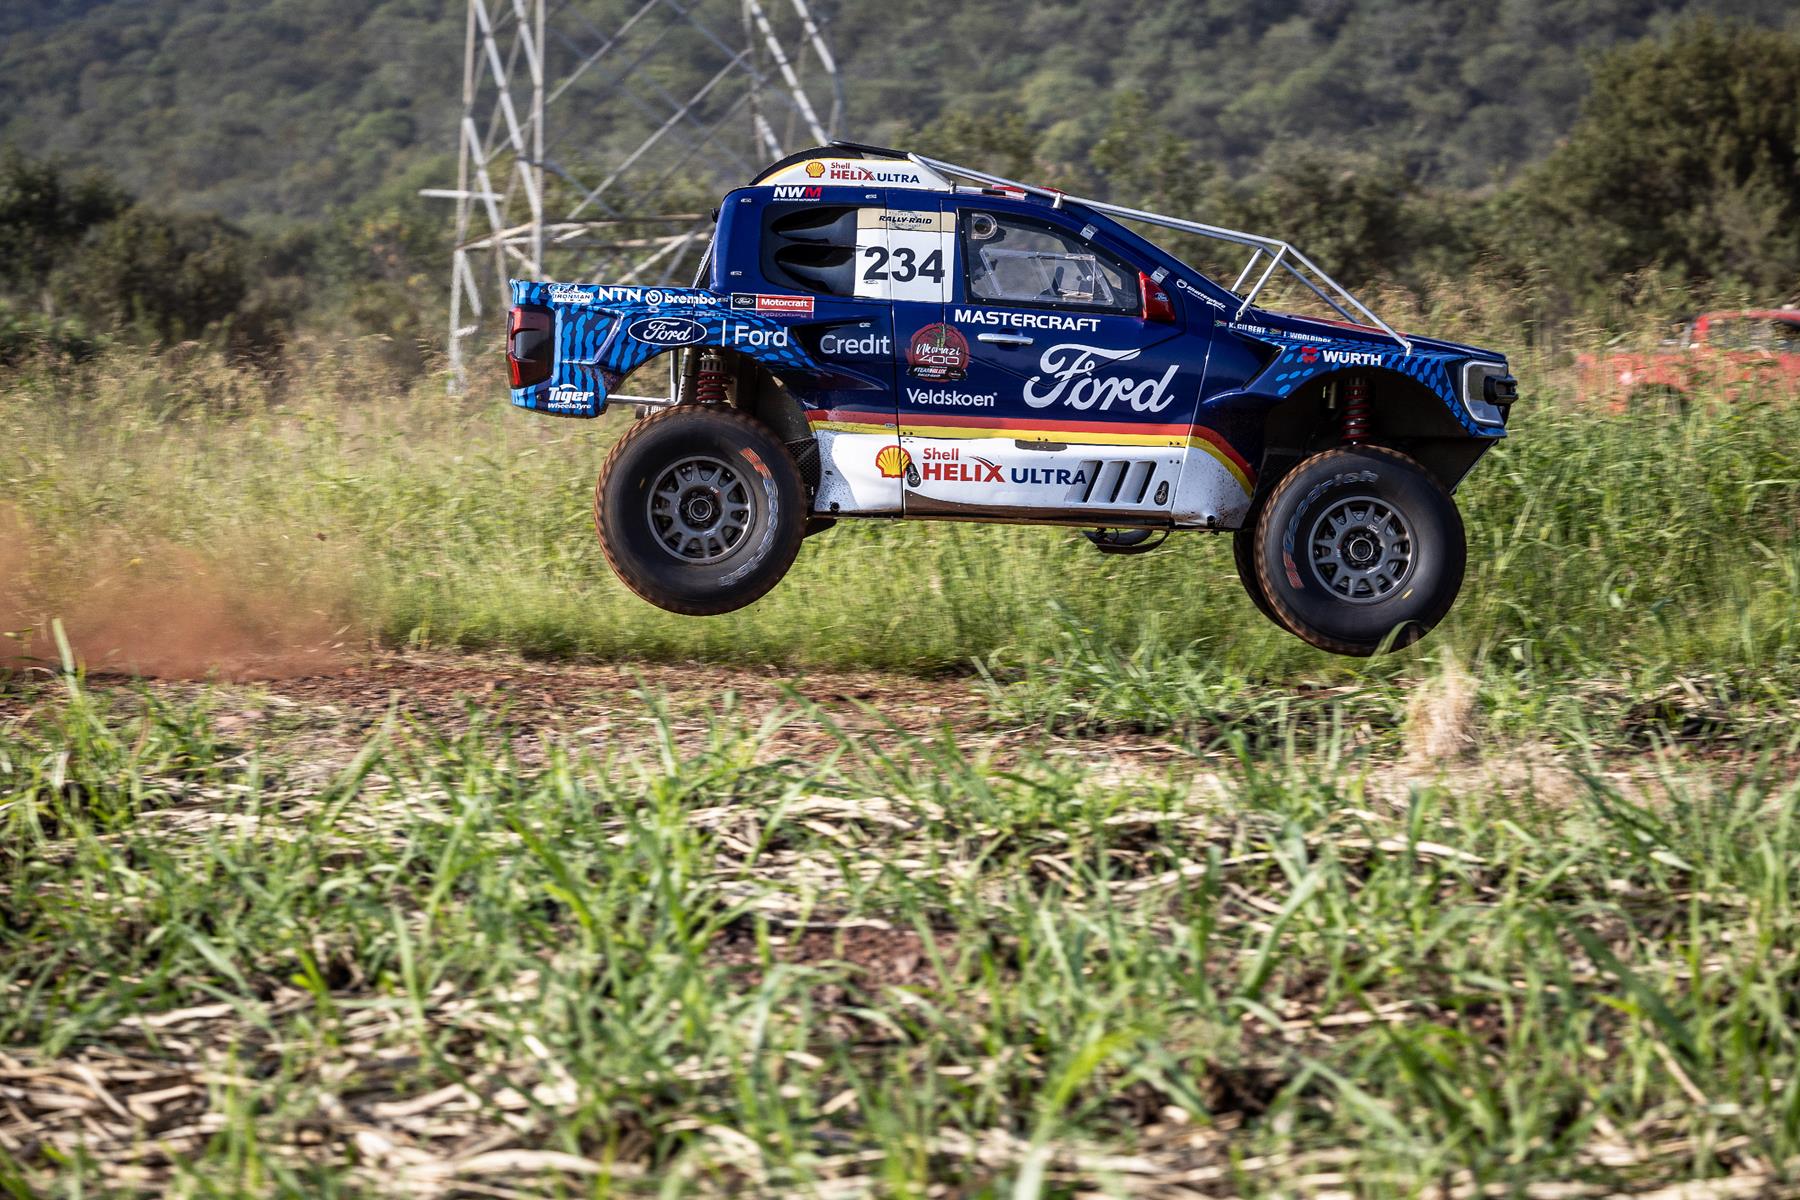 The Ford Ranger Ultimate flying through the air in the Nkomazi 400